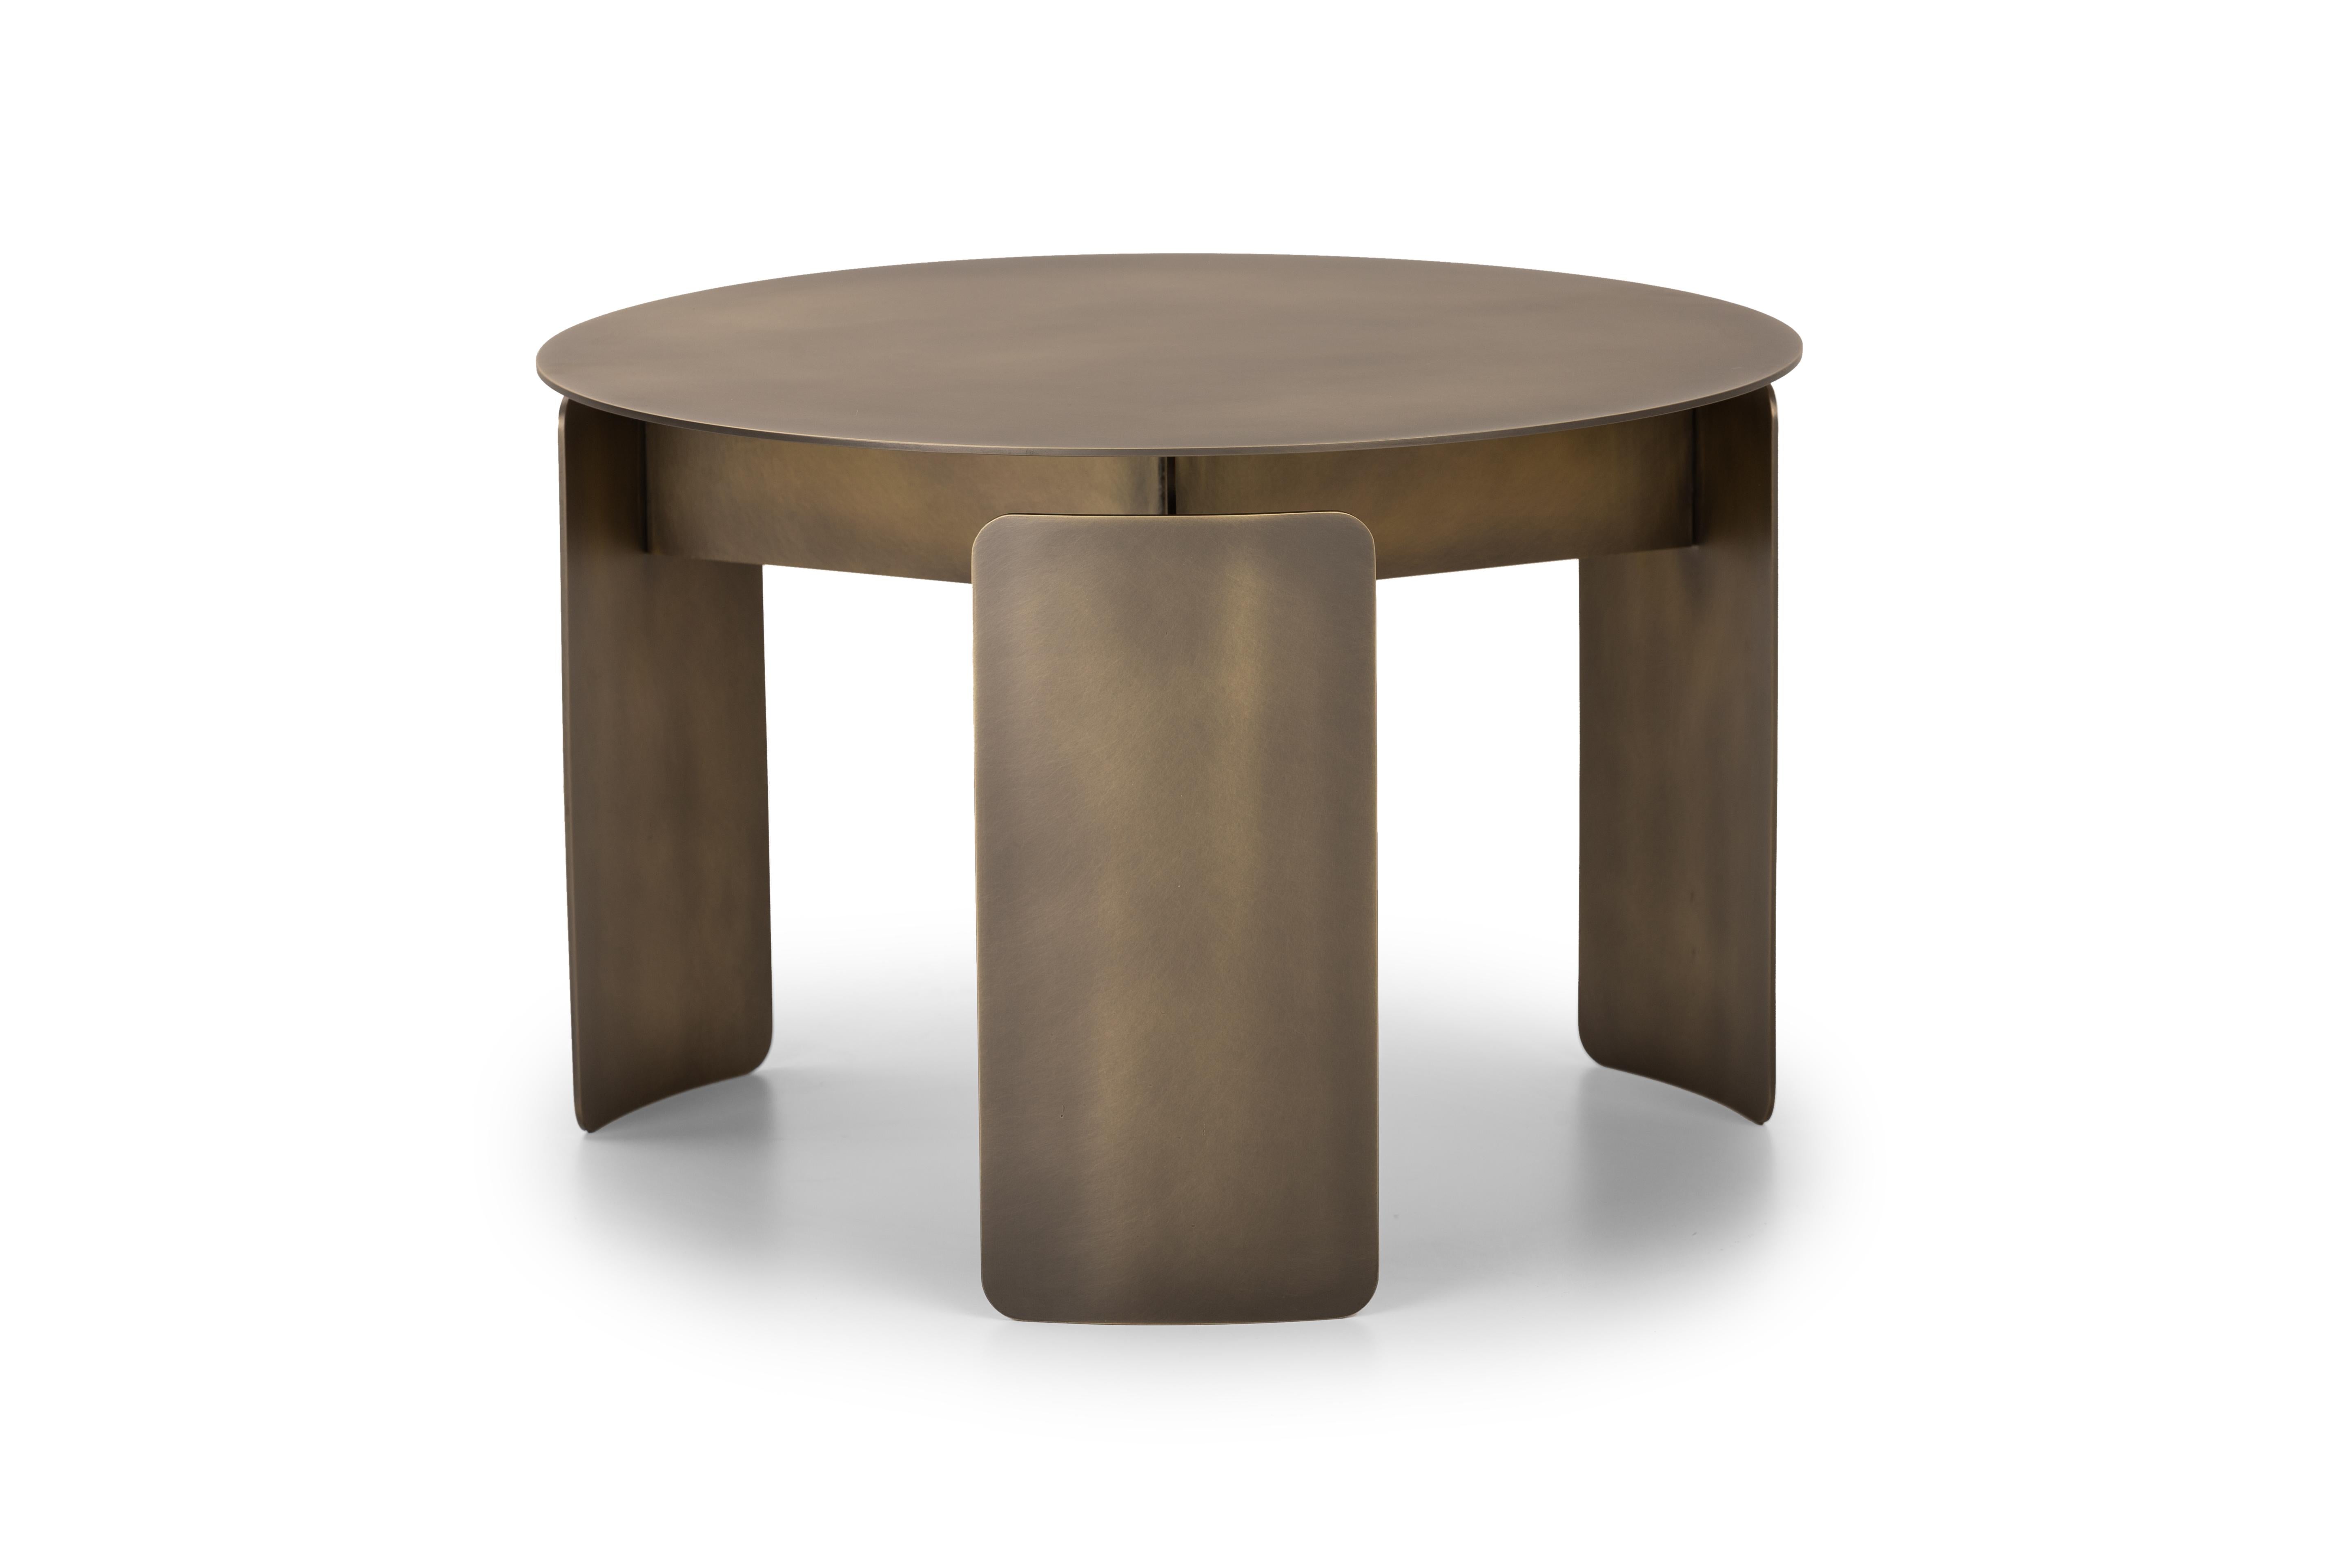 Shirudo bronze finish side table by Mingardo
Dimensions: D 60 x H 40 cm 
Materials: Stainless steel with matte cloudy bronze finish.
Weight: 30 kg

Also available in different finishes. 

The name Shirudo comes from the Japanese word for shield – a